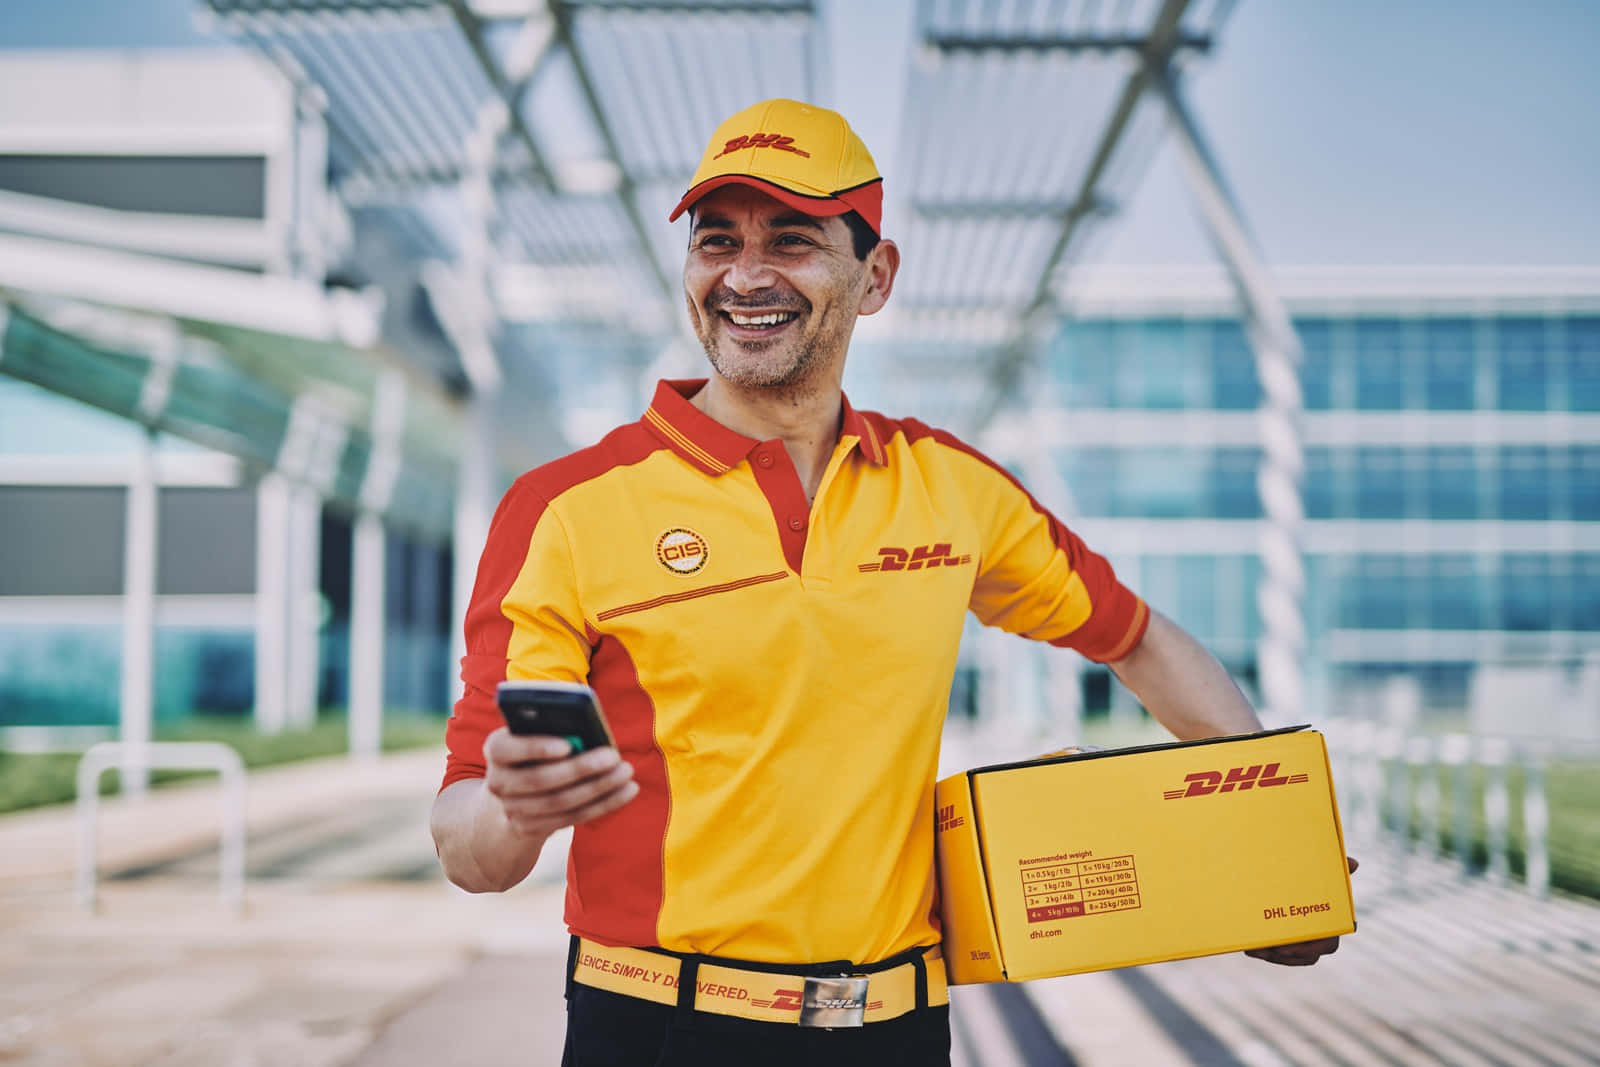 Dhl Delivery Man Holding A Package